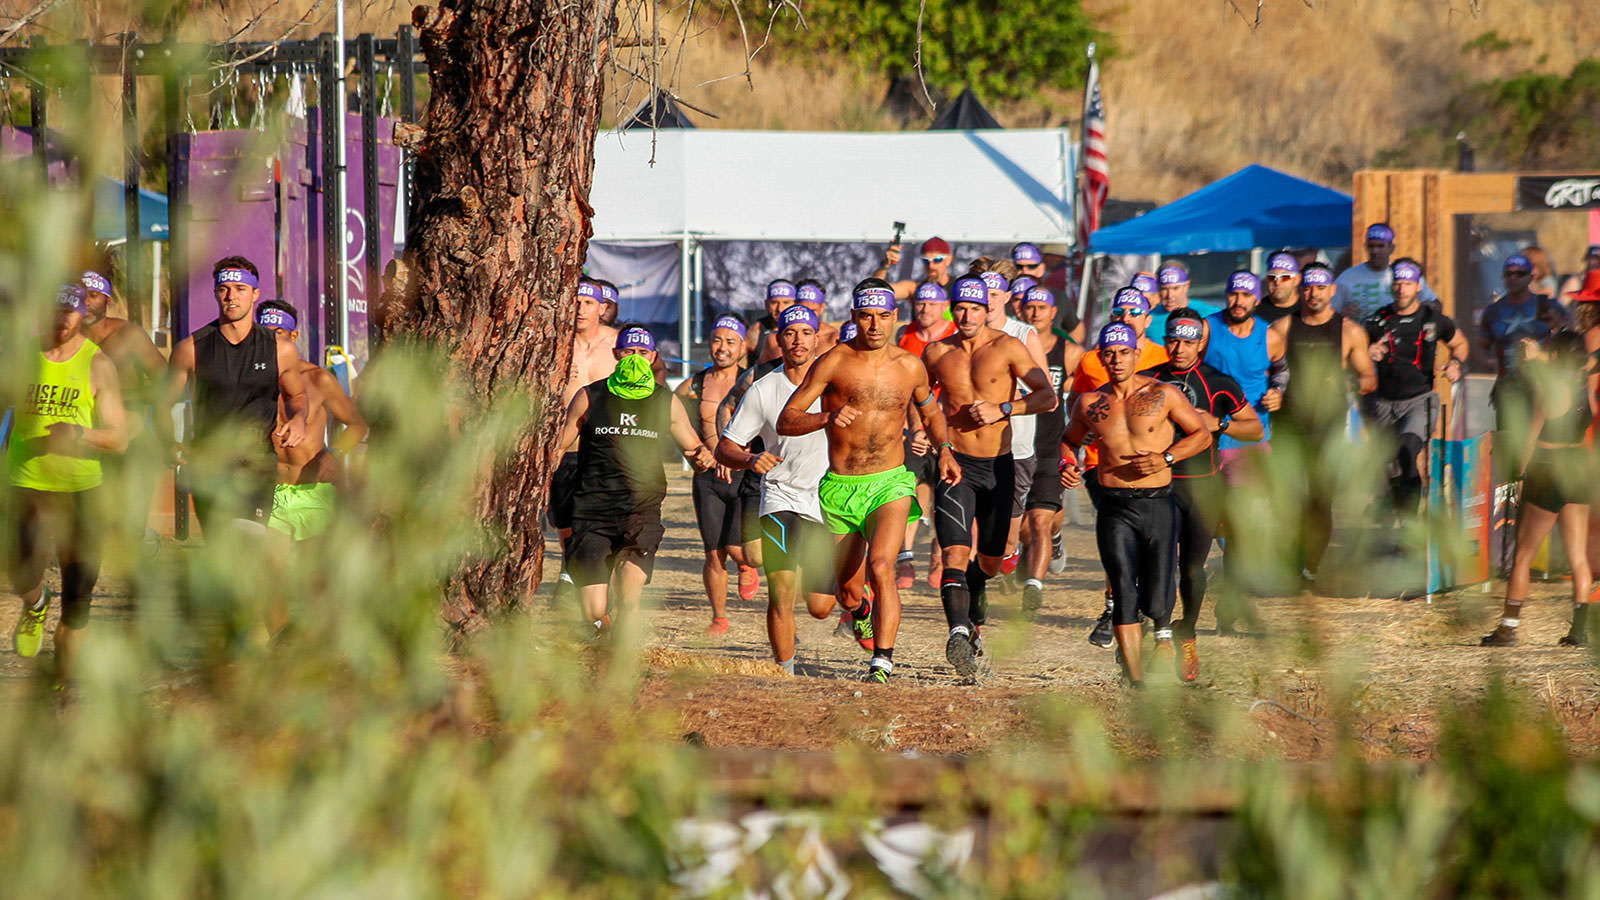 Grit OCR: East Walker Ranch, Los Angeles, California, United States